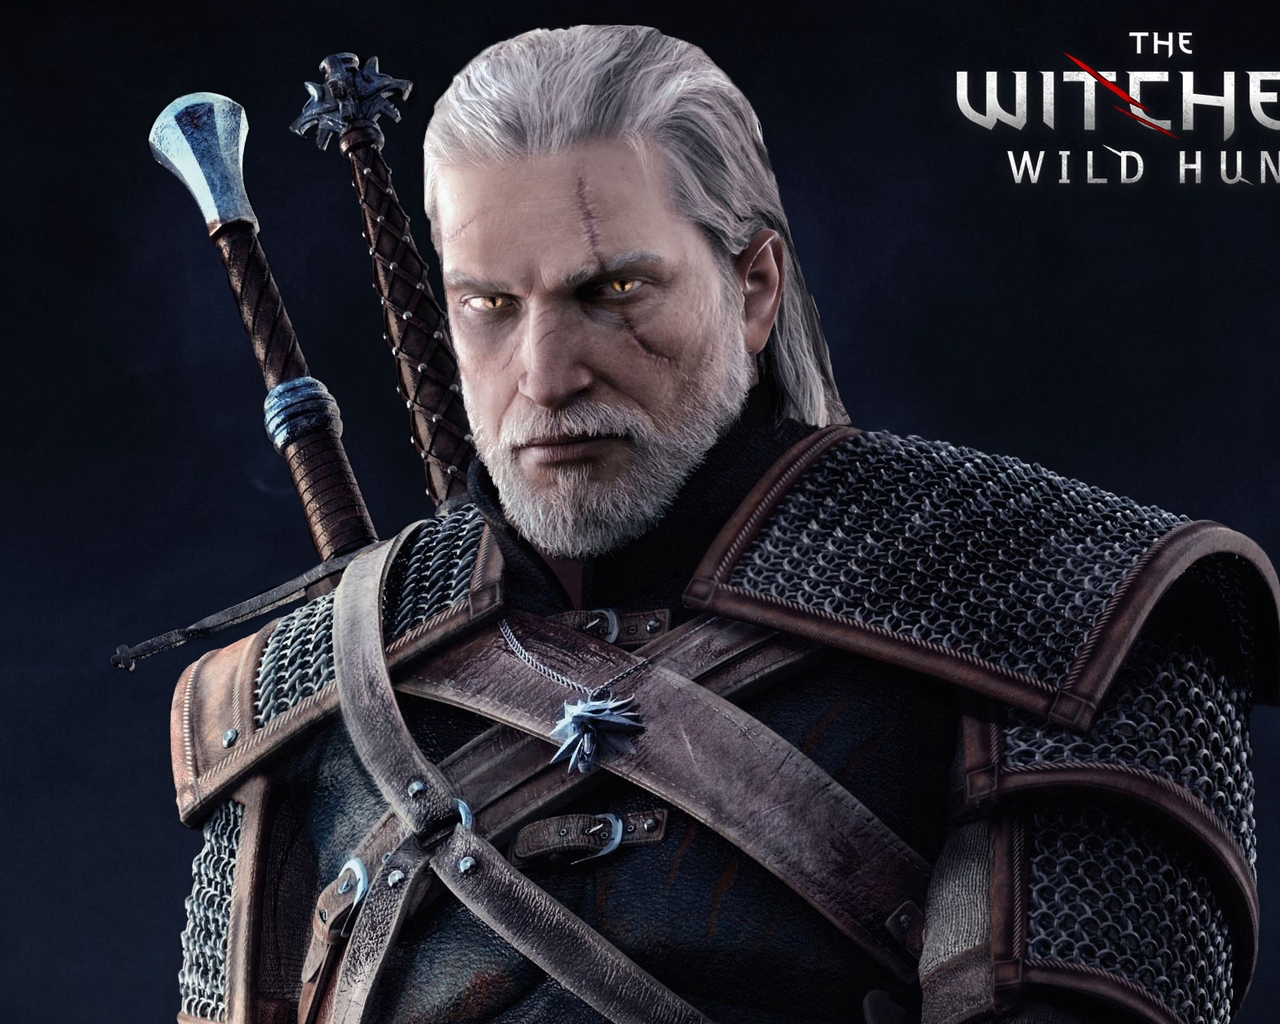 The Witcher 3 Wild Hunt Game for 1280 x 1024 resolution